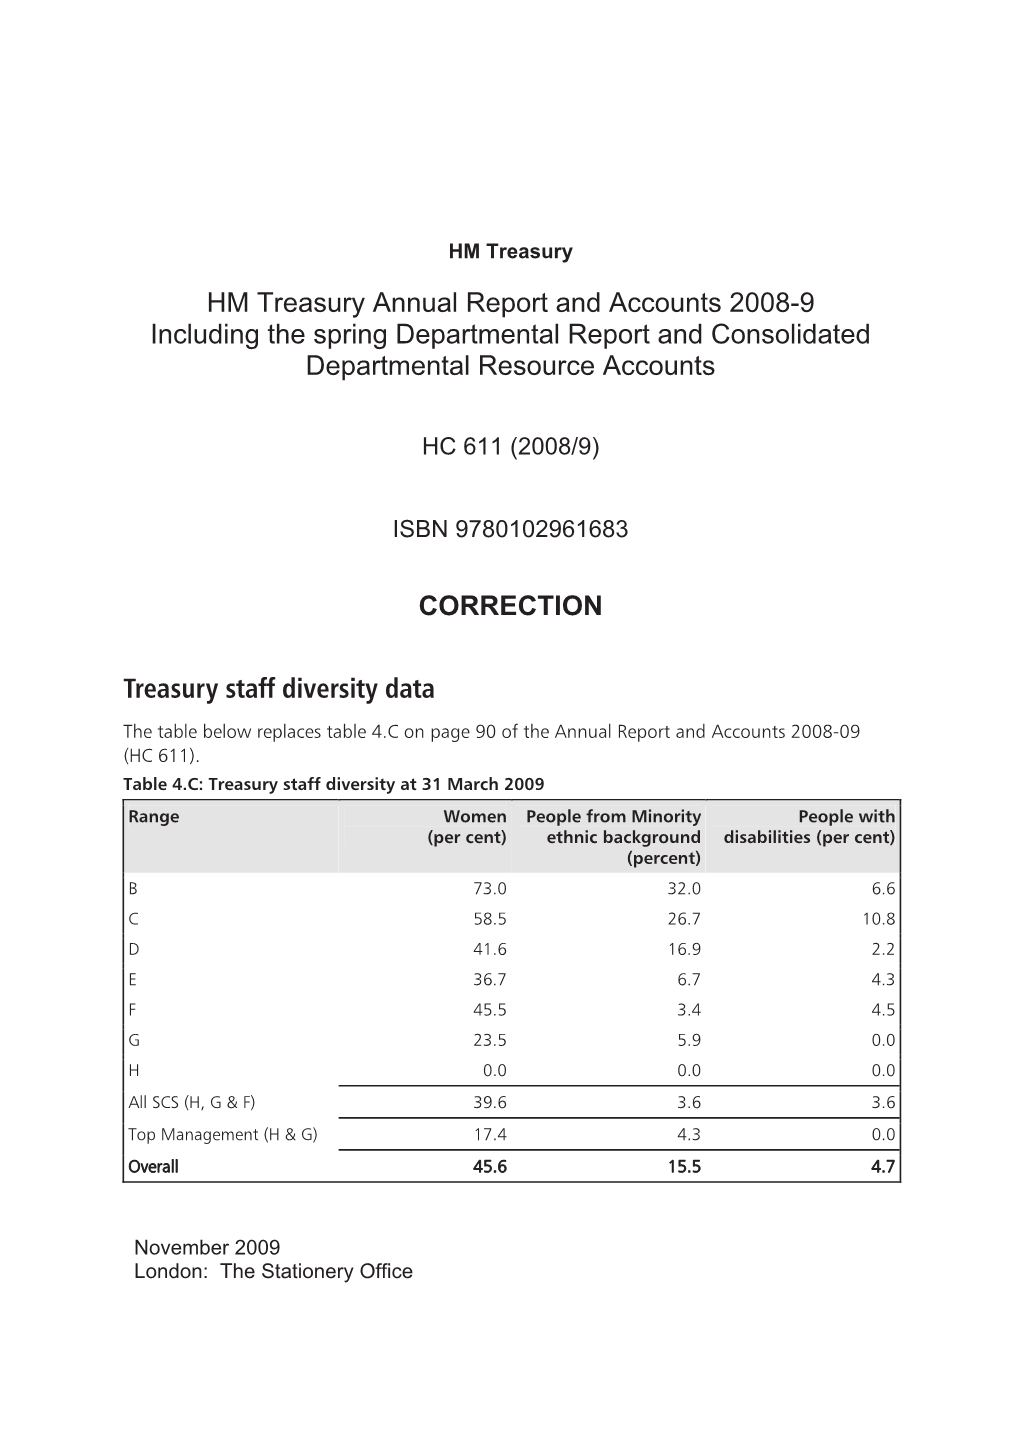 HM Treasury Annual Report and Accounts 2008-09 HC